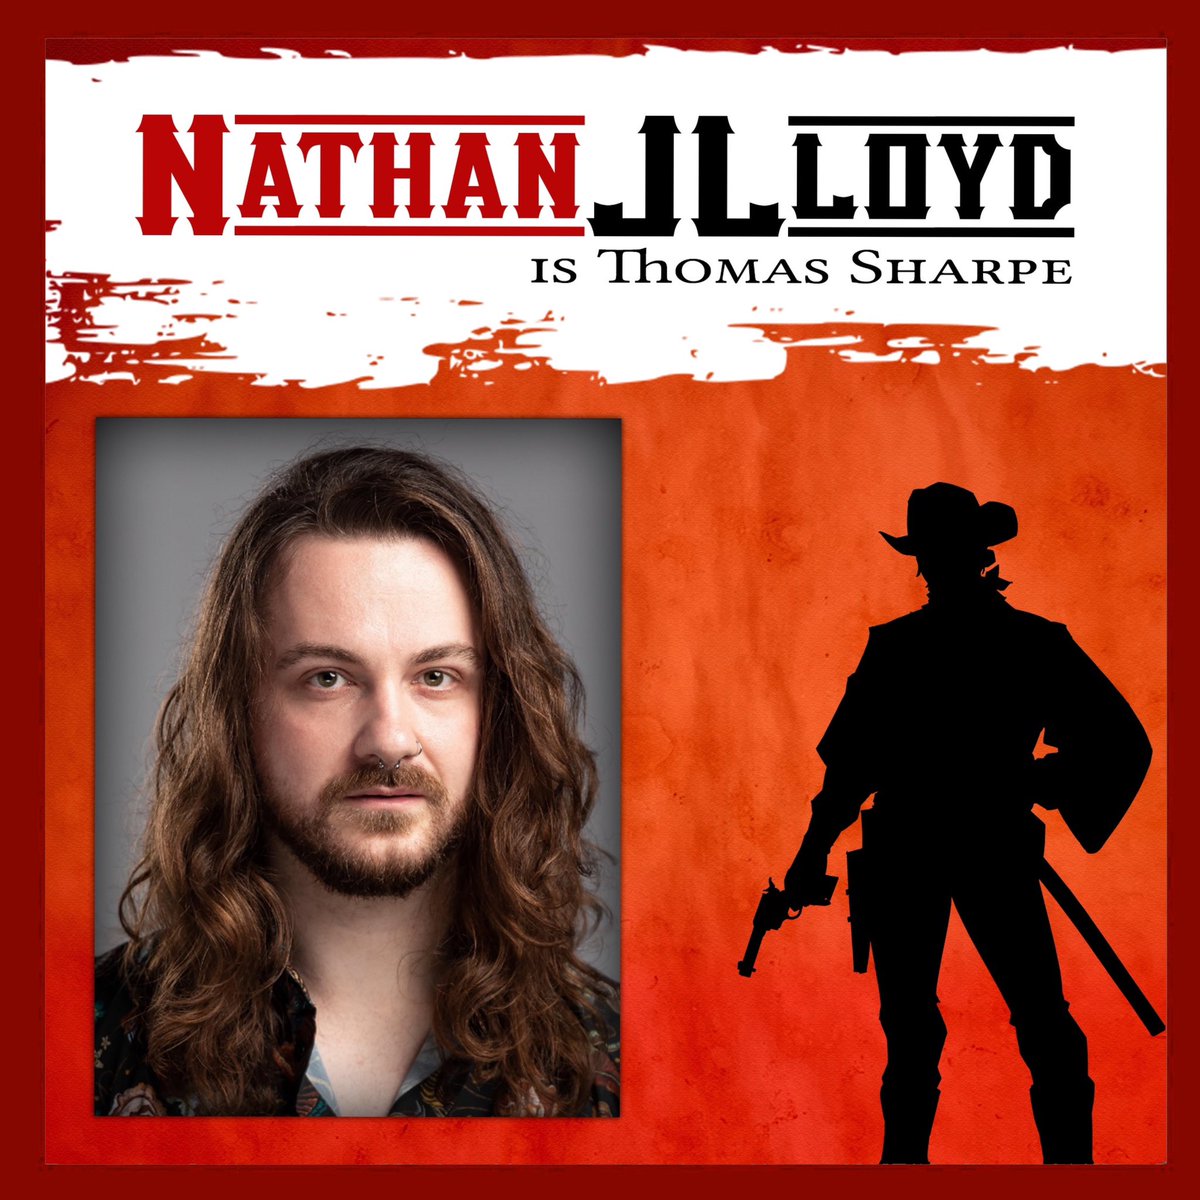 ‼️CASTING‼️
I am super excited to announce that I shall be playing the lead role of “THOMAS SHARPE” in @redhollowfilm 

I auditioned for it a while back and have had my fingers crossed since!

Filming begins in August 🤠 
#actor #actorlife #casting #film #castingdirector